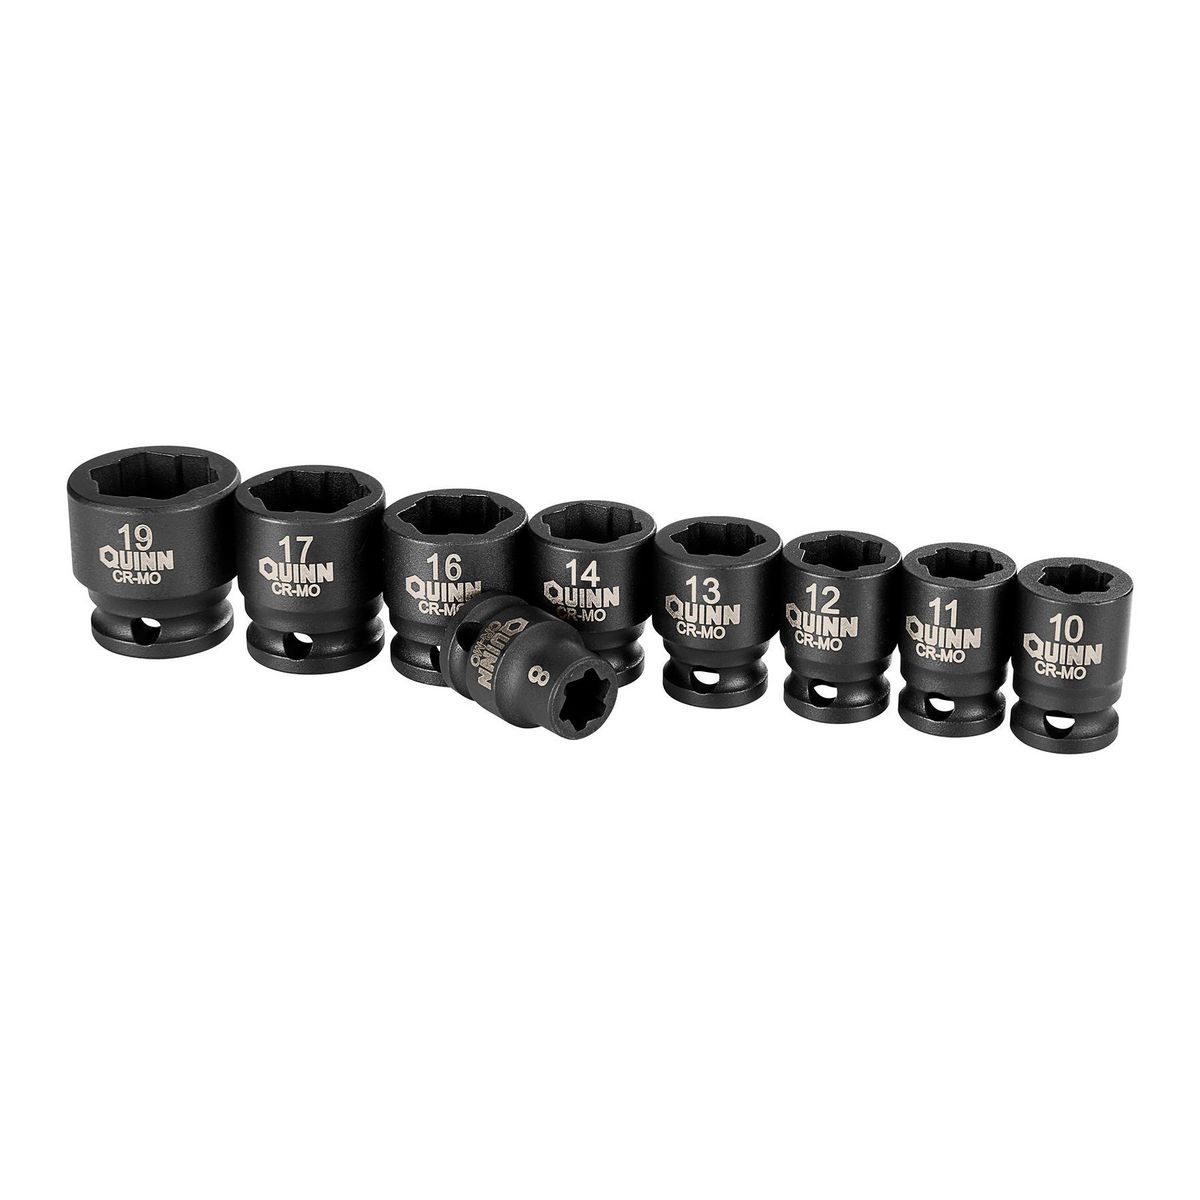 3/8 in. Drive Metric Bolt Extractor Socket Set, 9-Piece